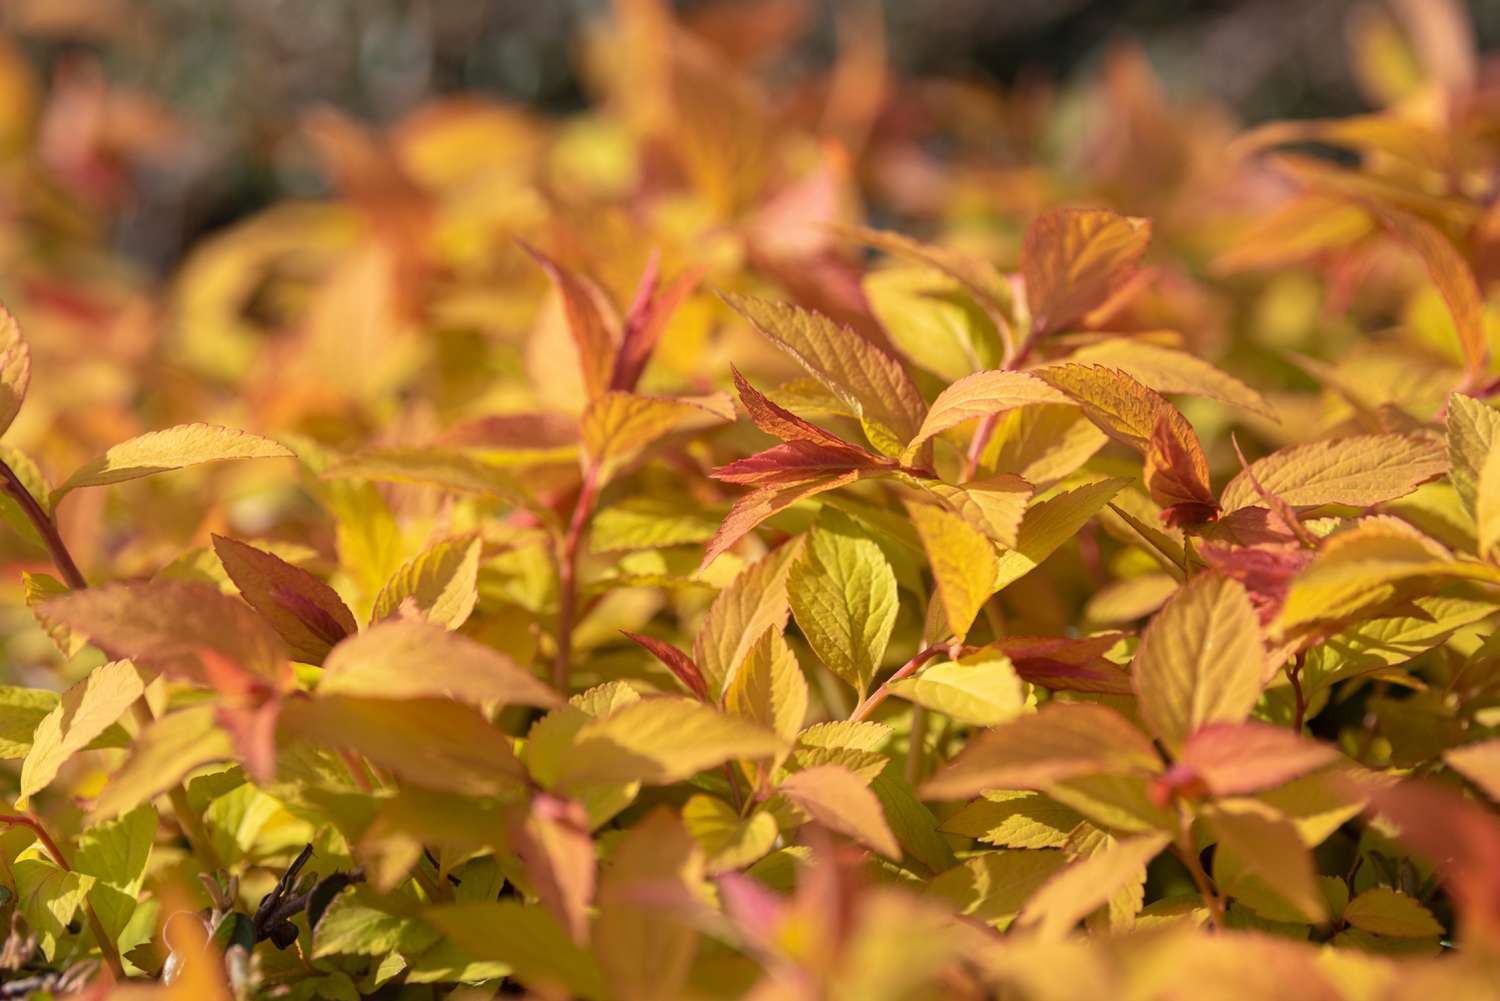 Goldflame spirea plant with orange and yellow leaves in sunlight closeup